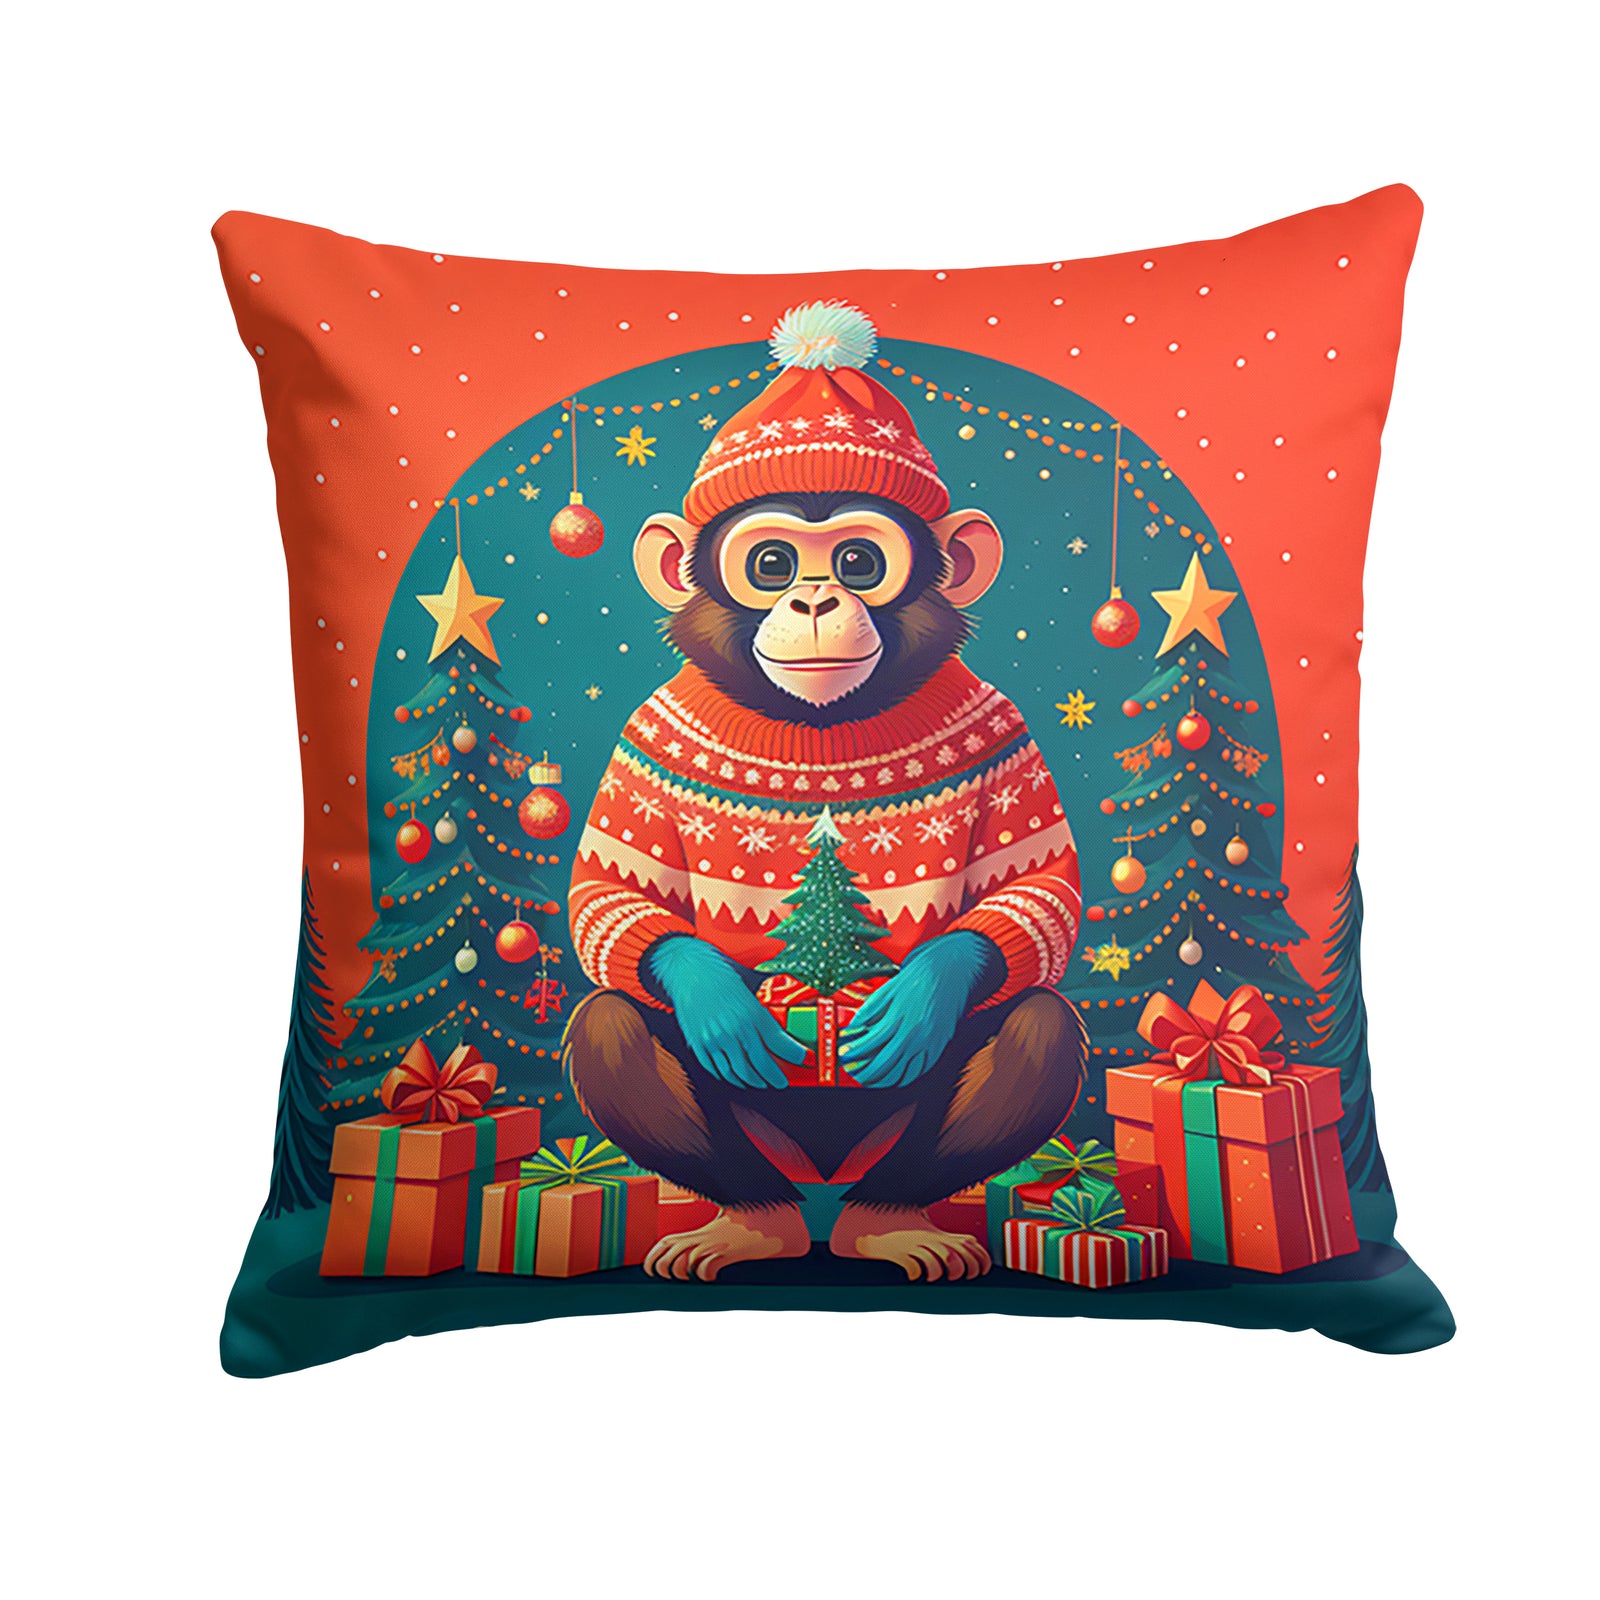 Buy this Monkey Christmas Fabric Decorative Pillow